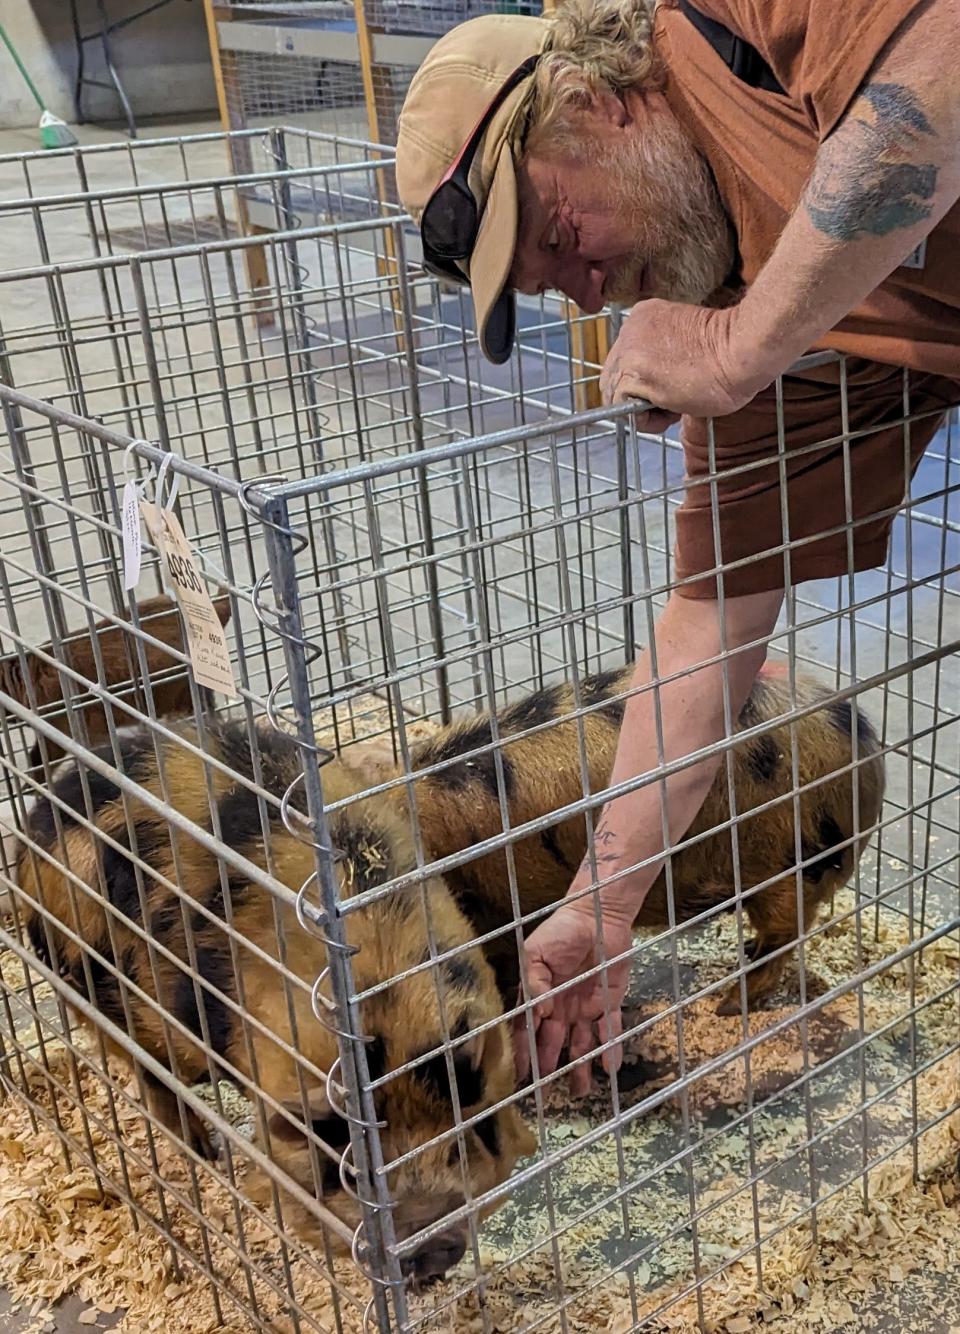 Bryan Bartlett of Illinois City, Illinois, pets the two 60-pound Kunekune pigs he recently brought to the Kalona Sales Barn. The exotic pig breed originated in New Zealand and “are used more for pets than butchering,” he said. He’s been coming to sales here to buy and sell for nearly five decades, noting that the barn draws farmers from 5 states.